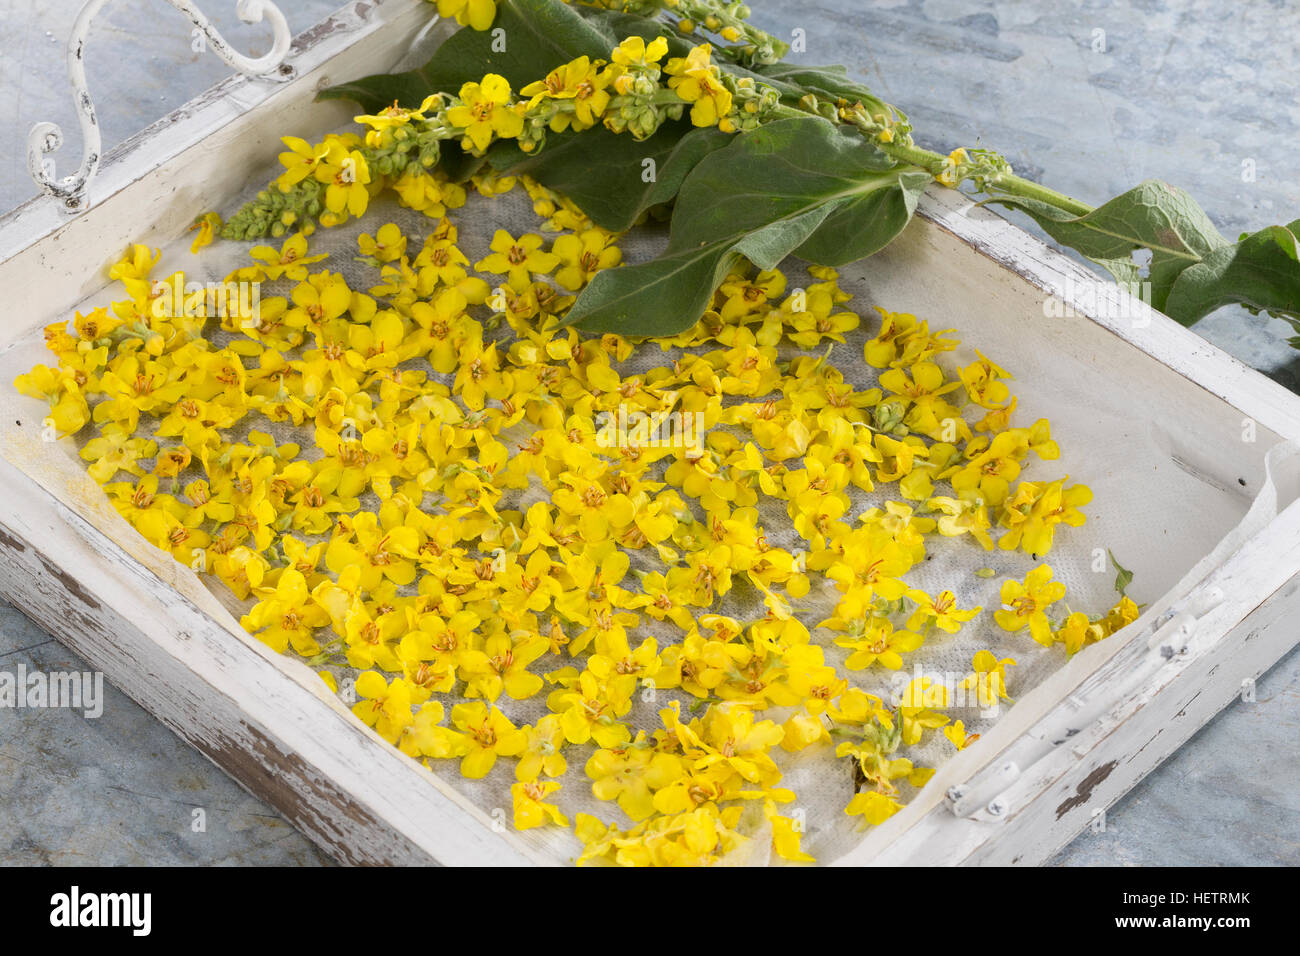 Page 2 - Verbascum High Resolution Stock Photography and Images - Alamy